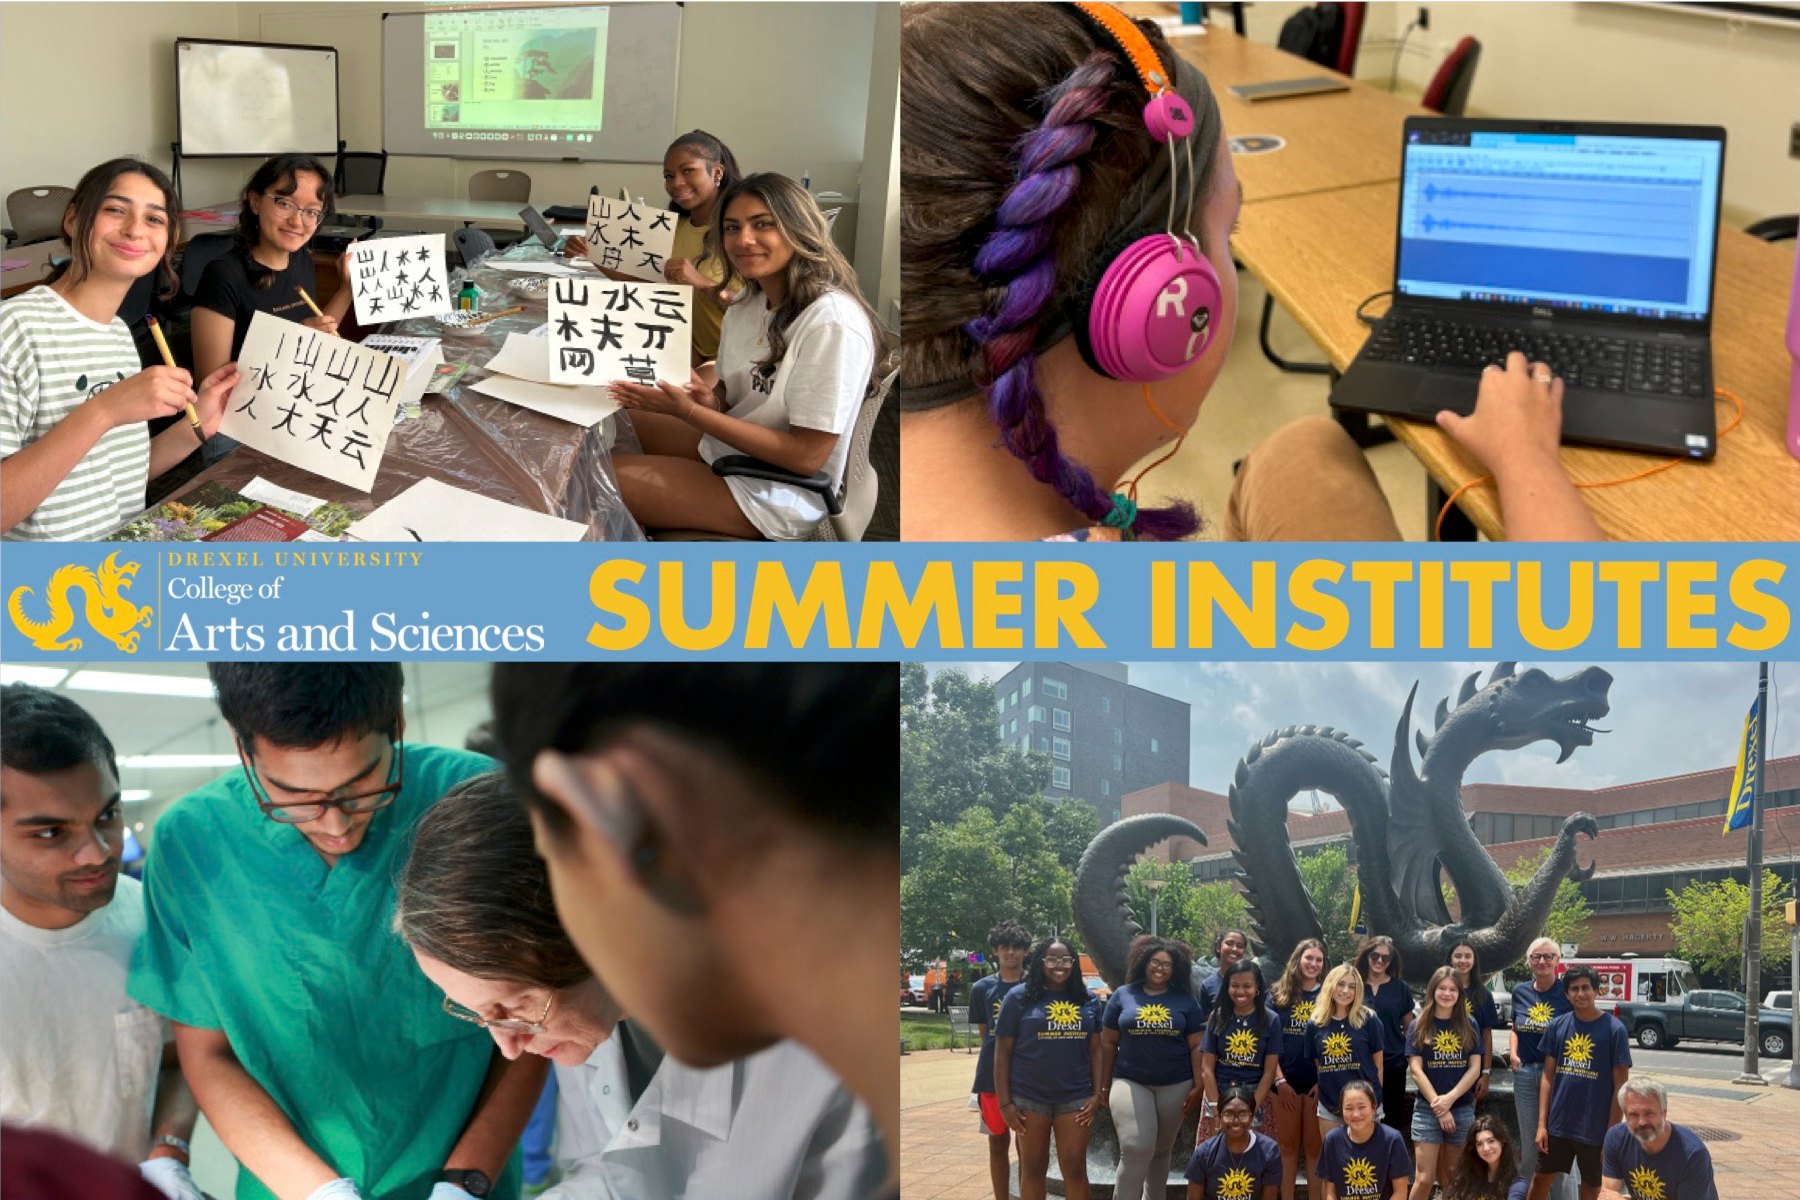 Drexel's College of Arts and Sciences offers various summer programs for high school students